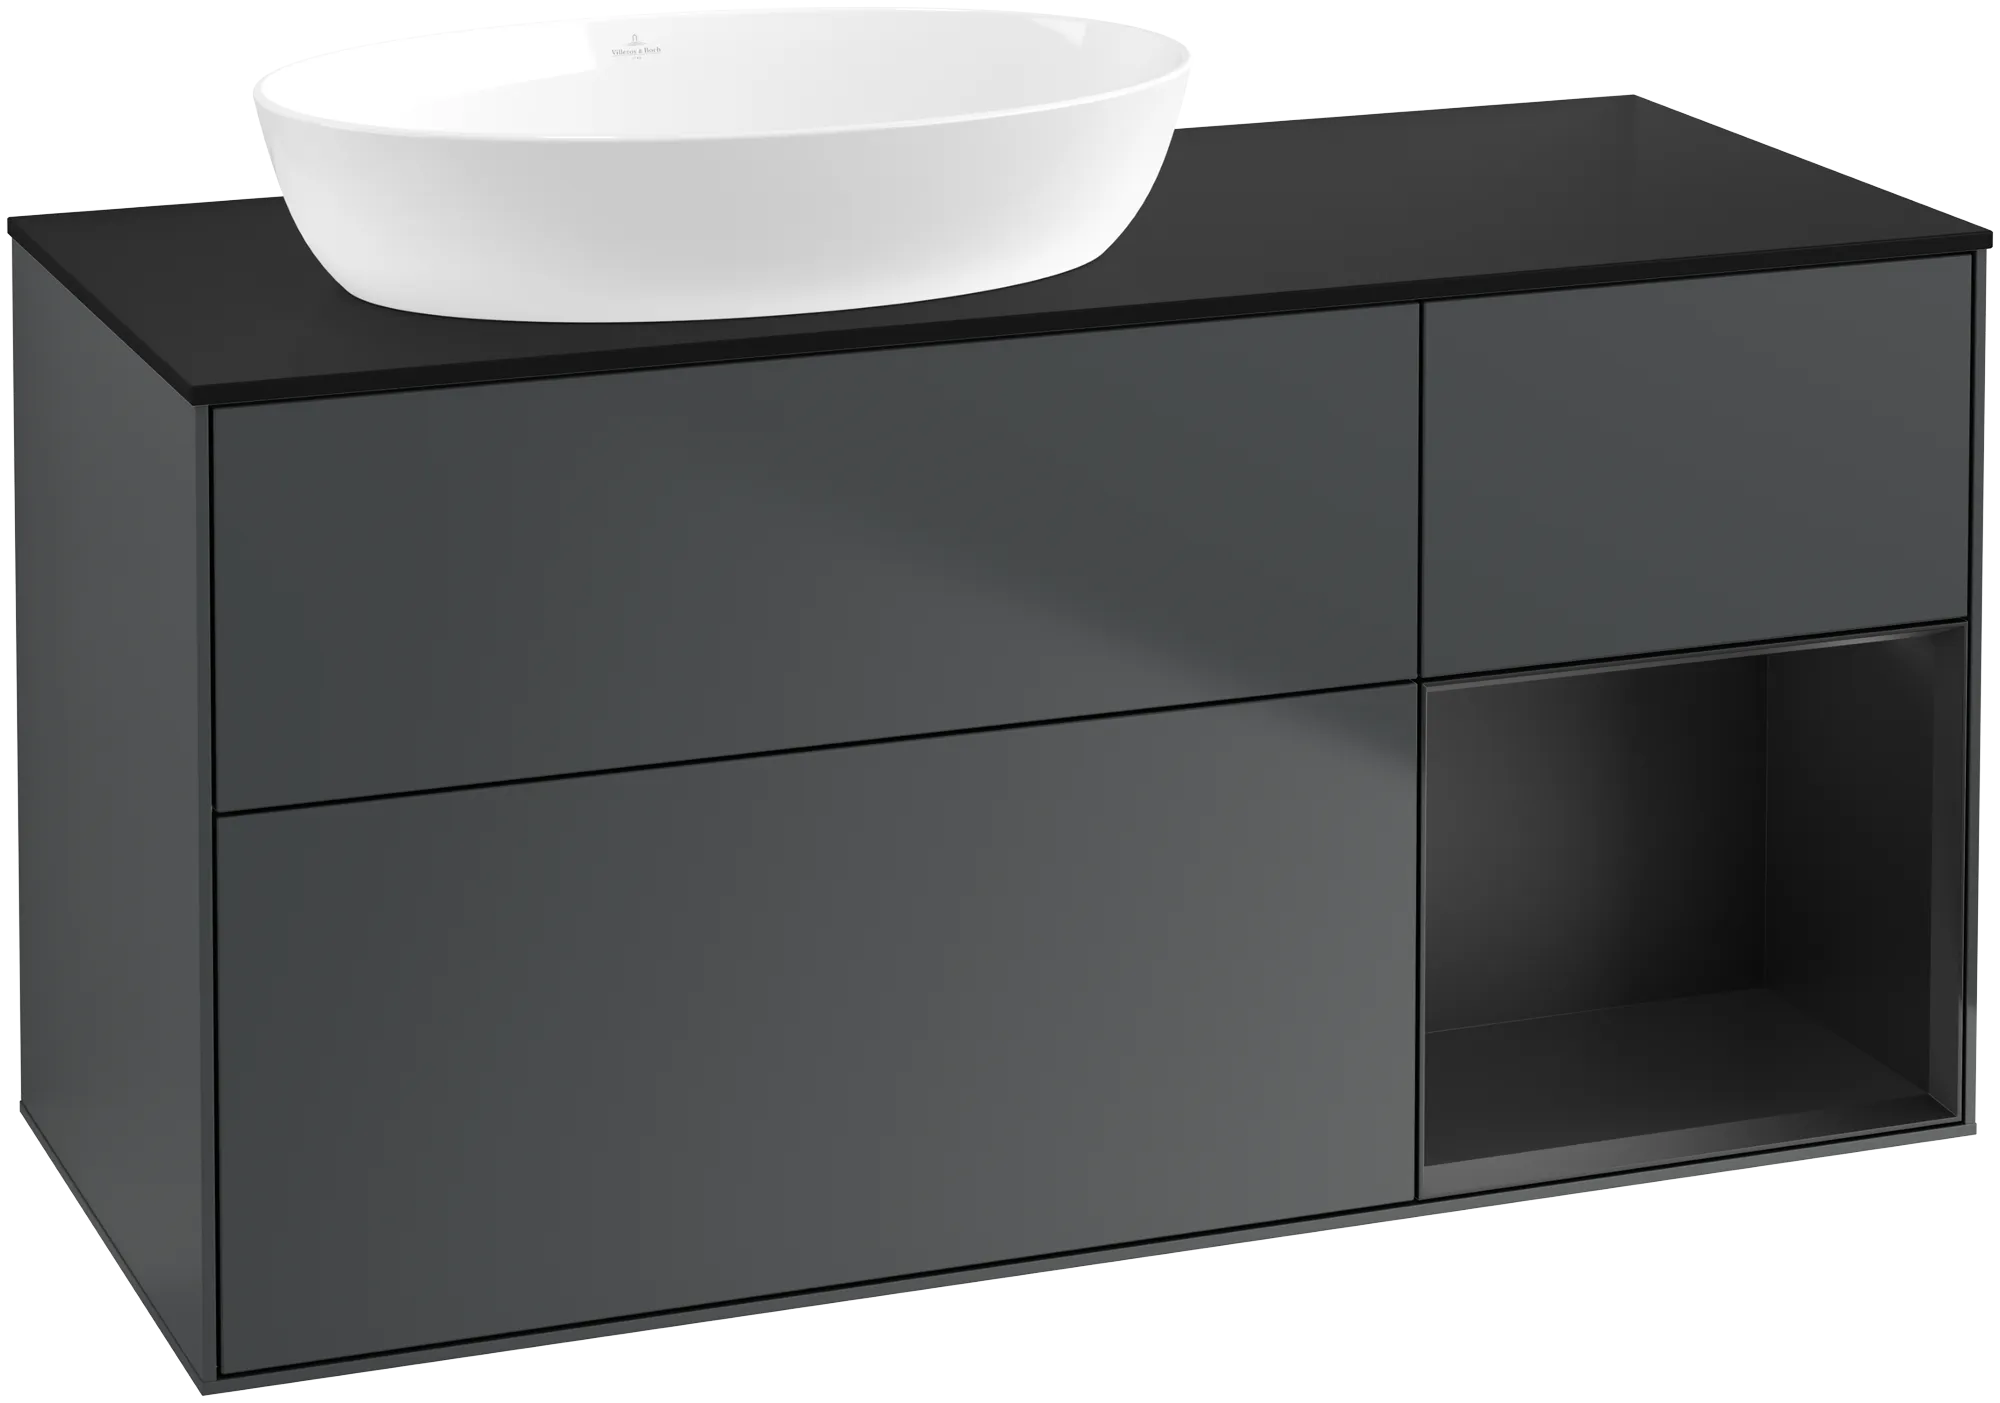 Picture of VILLEROY BOCH Finion Vanity unit, with lighting, 3 pull-out compartments, 1200 x 603 x 501 mm, Midnight Blue Matt Lacquer / Black Matt Lacquer / Glass Black Matt #FA52PDHG